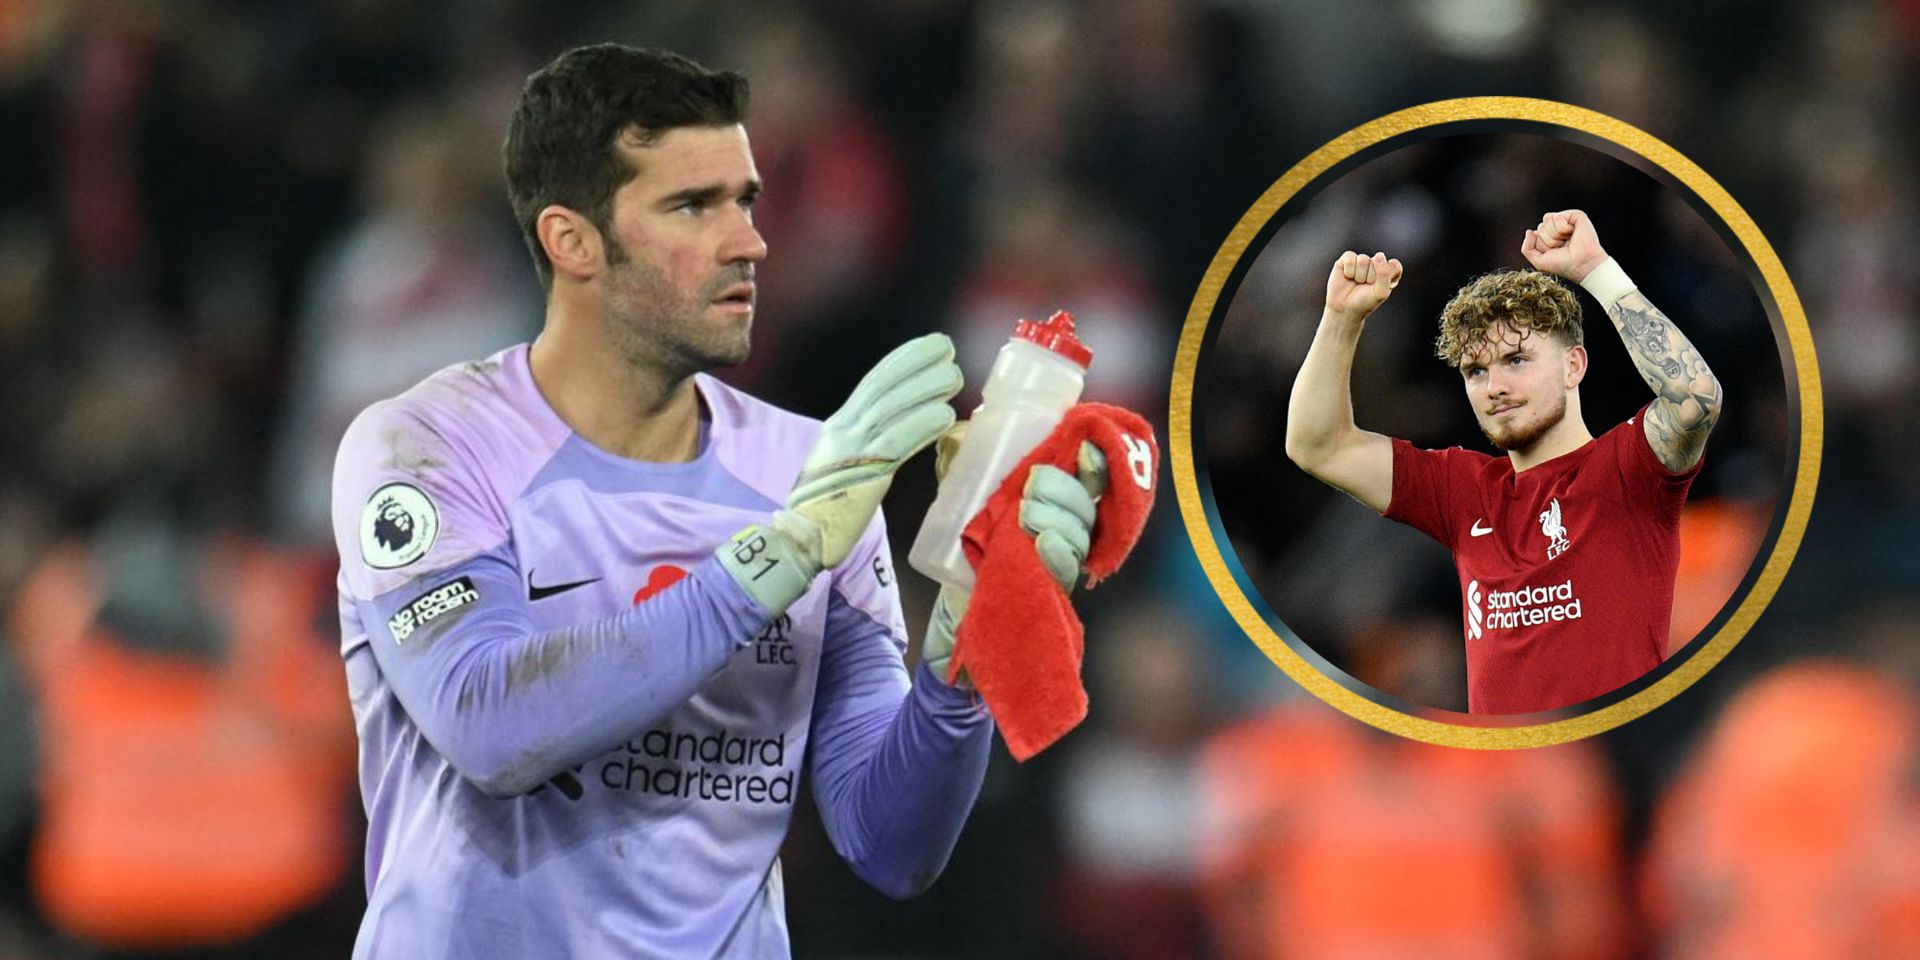 Teammate suggests Alisson needs to ‘shave his beard every game now’ after Southampton performance